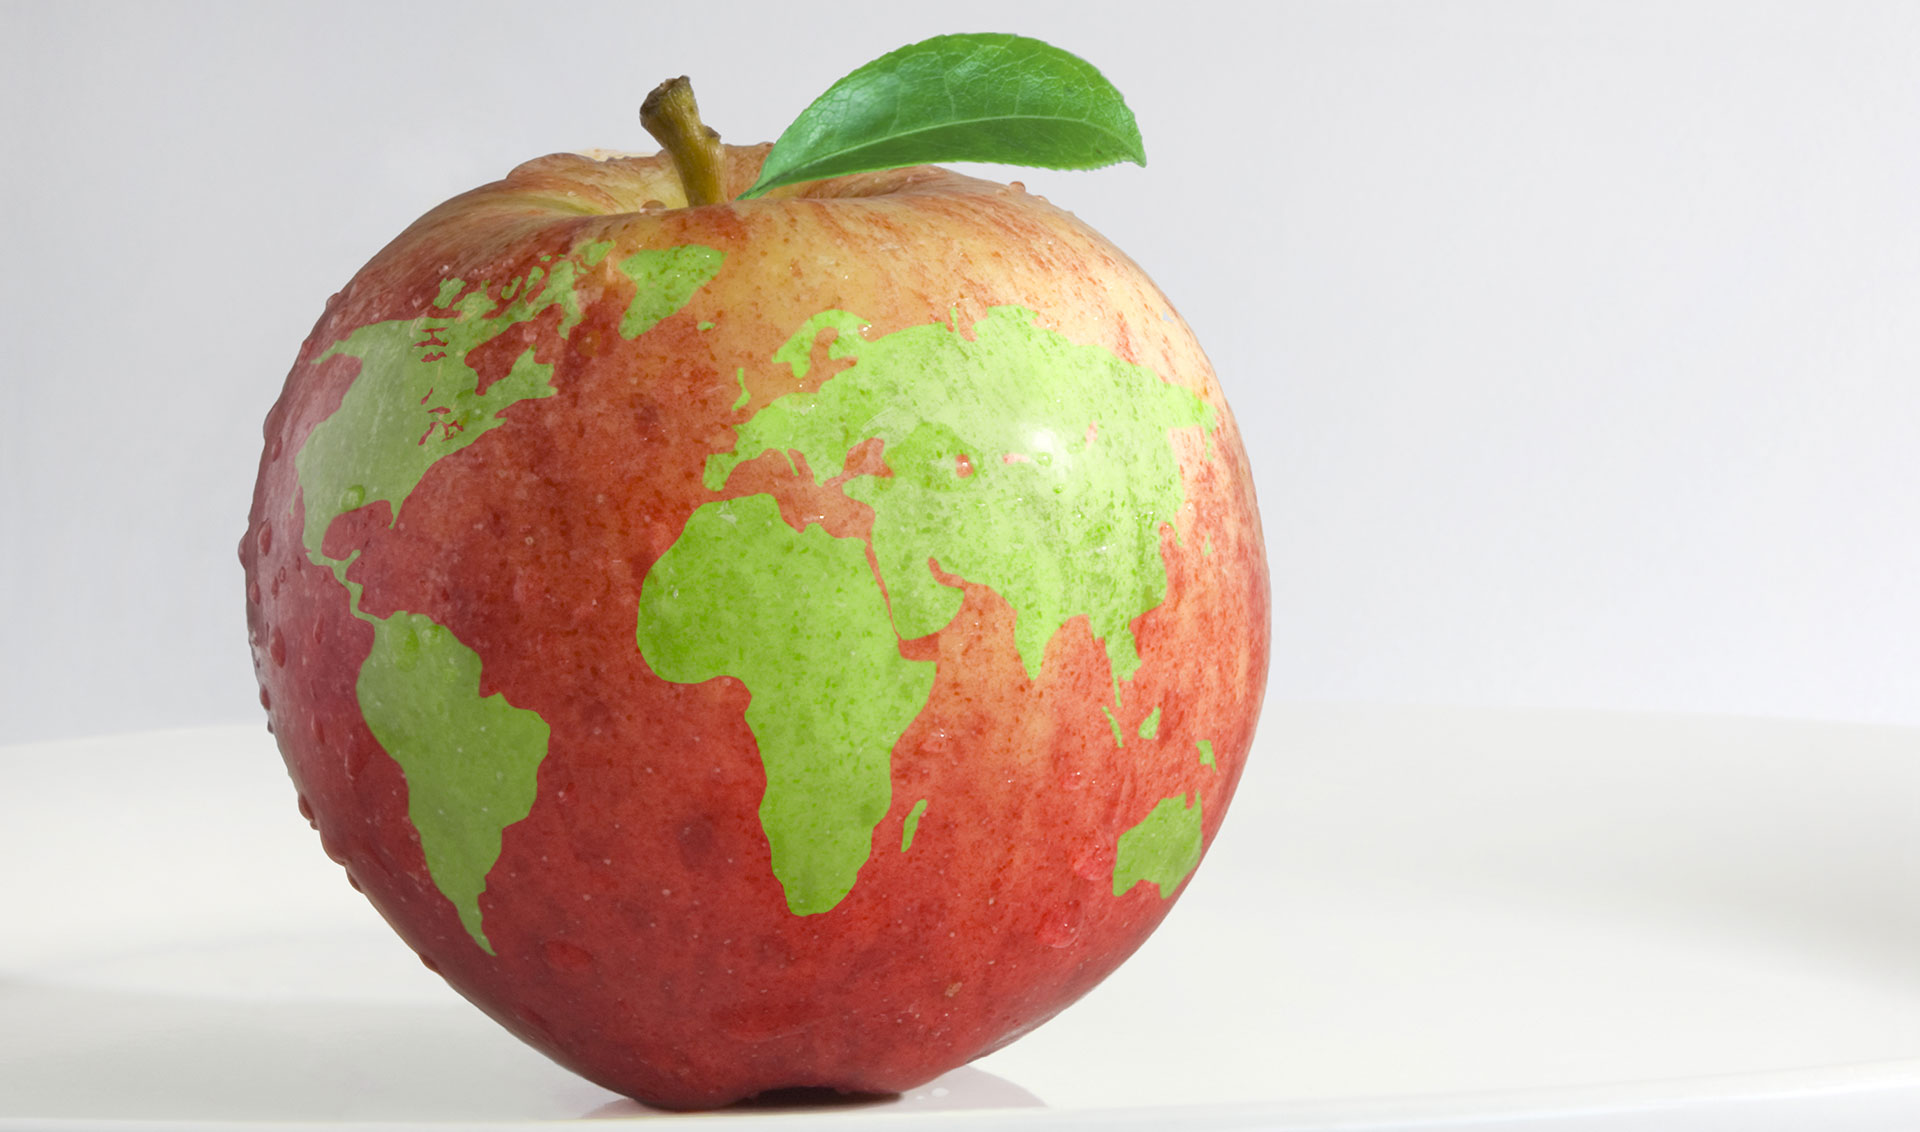 A red apple with green spots that represent the continents of the earth